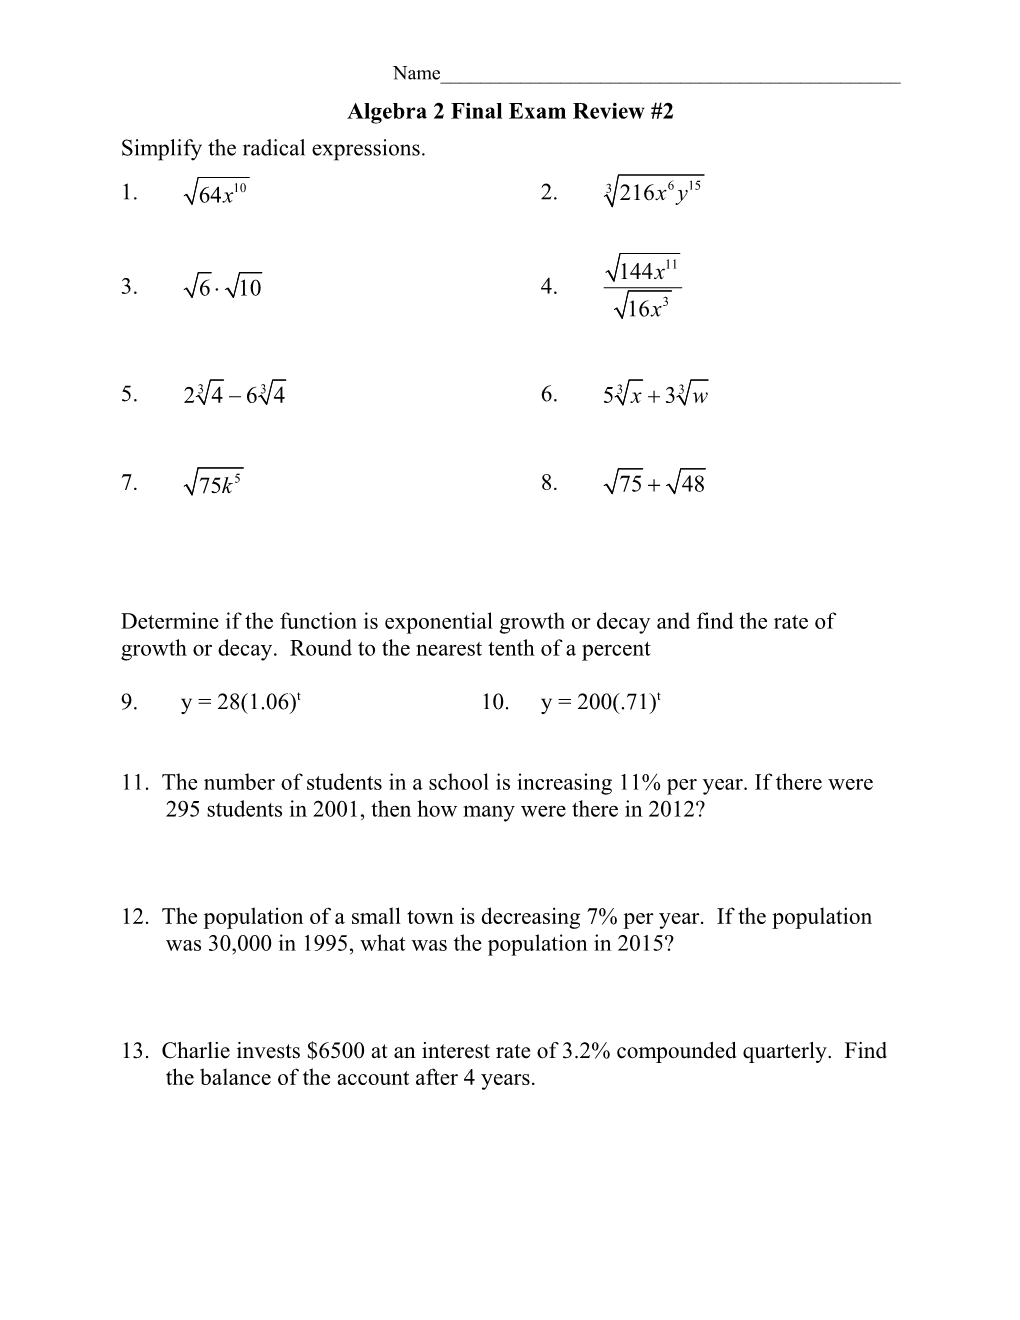 Find the Equation from the Given Information